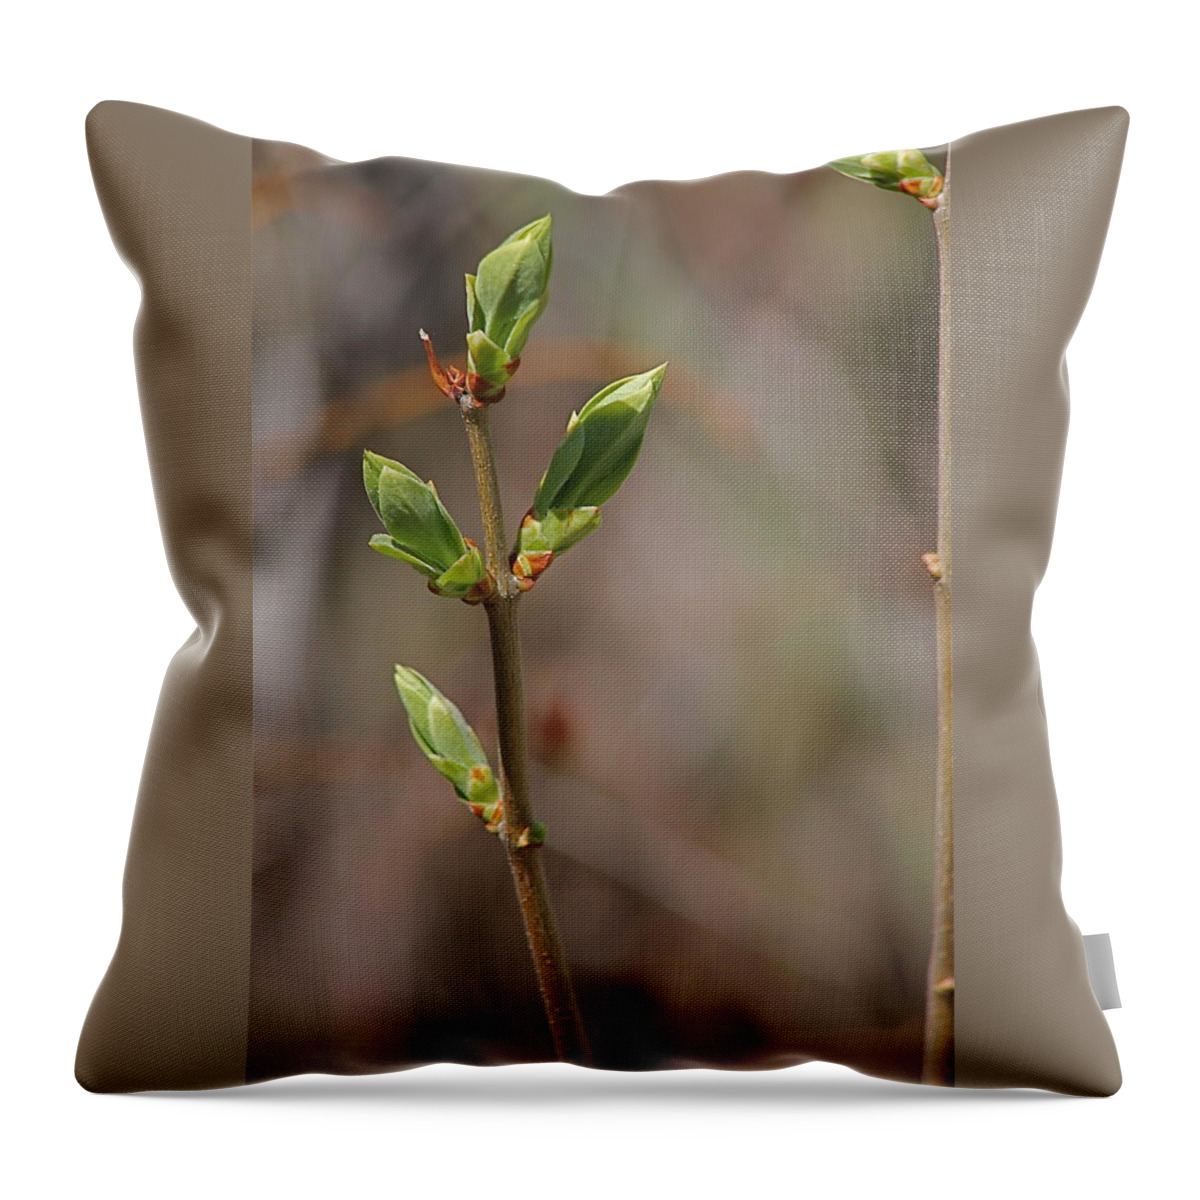 Bushes Throw Pillow featuring the photograph Leafing Out by Wayne Williams